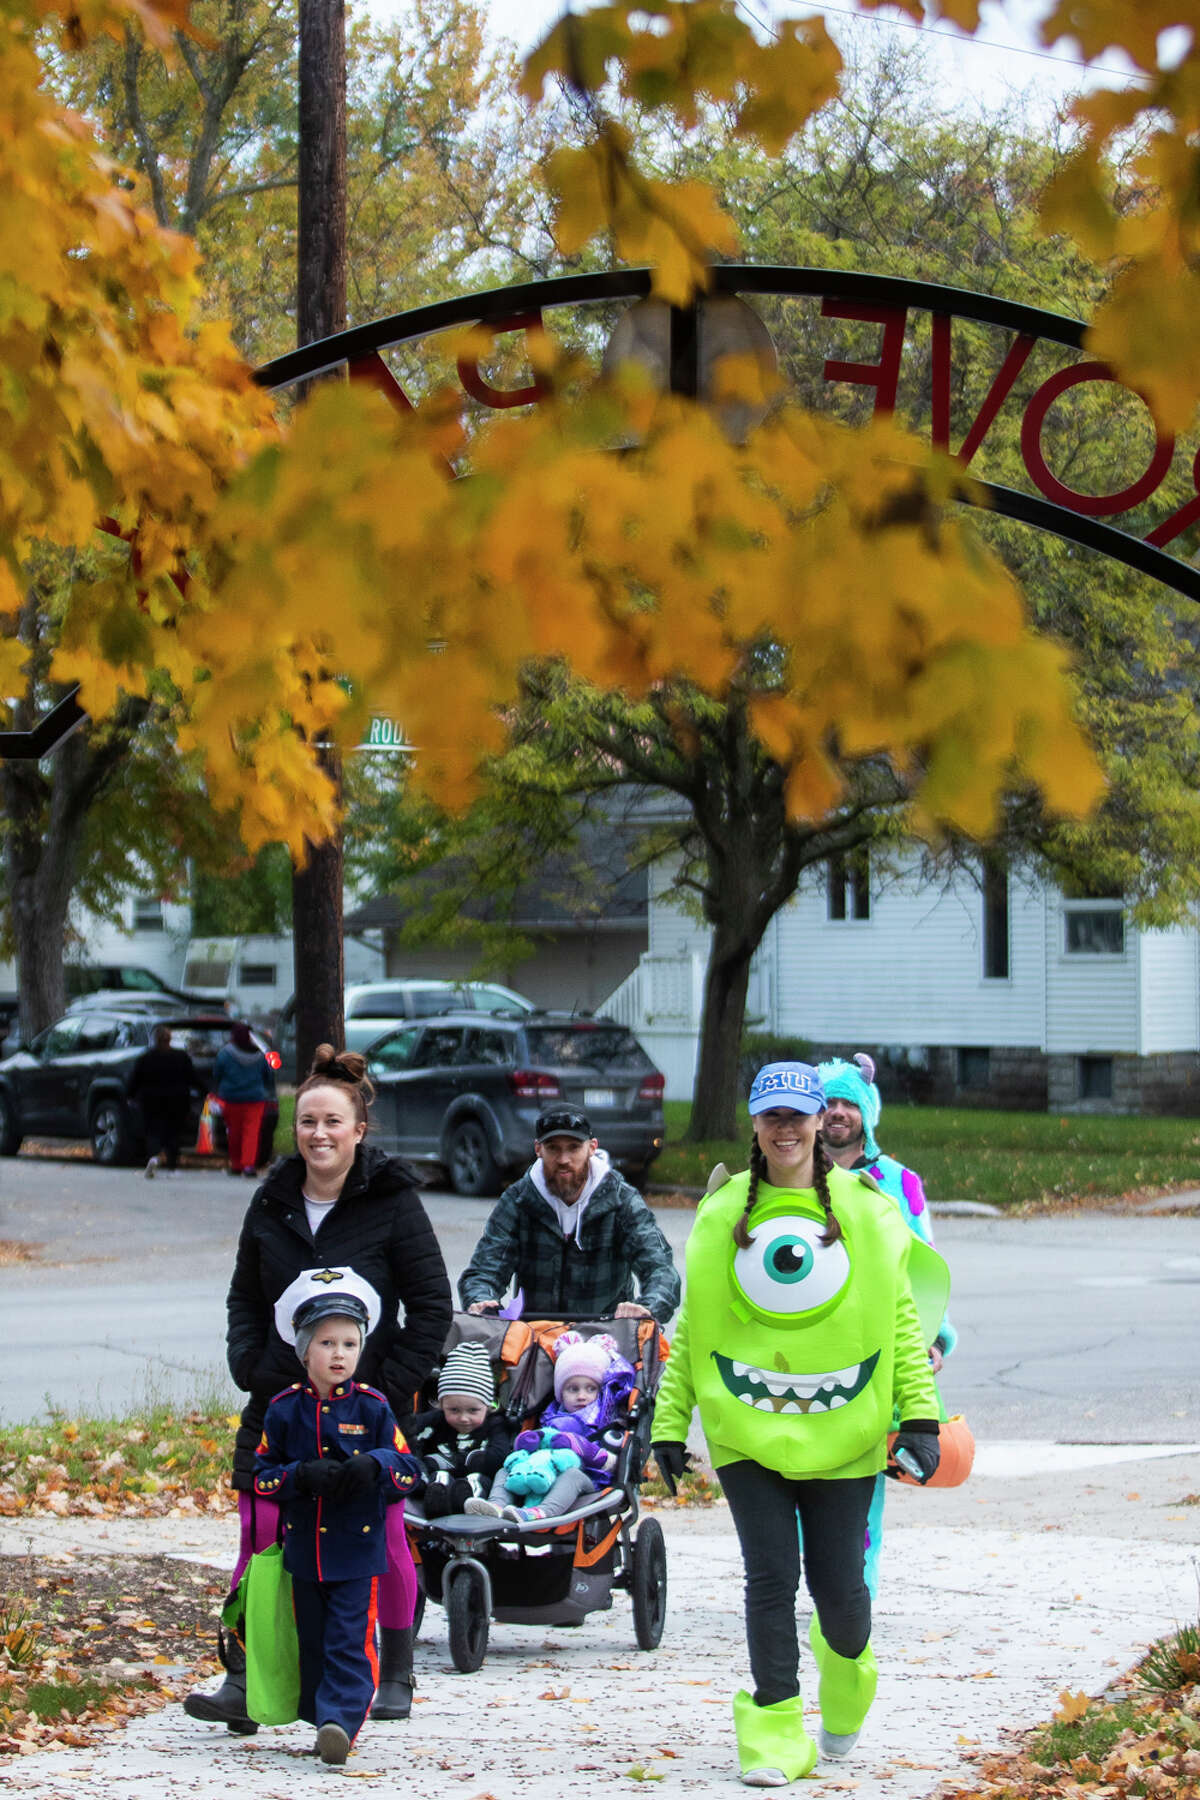 Children collect candy during a trunk-or-treat event Thursday, Oct. 28, 2021 at Grove Park in Midland. (Katy Kildee/kkildee@mdn.net)